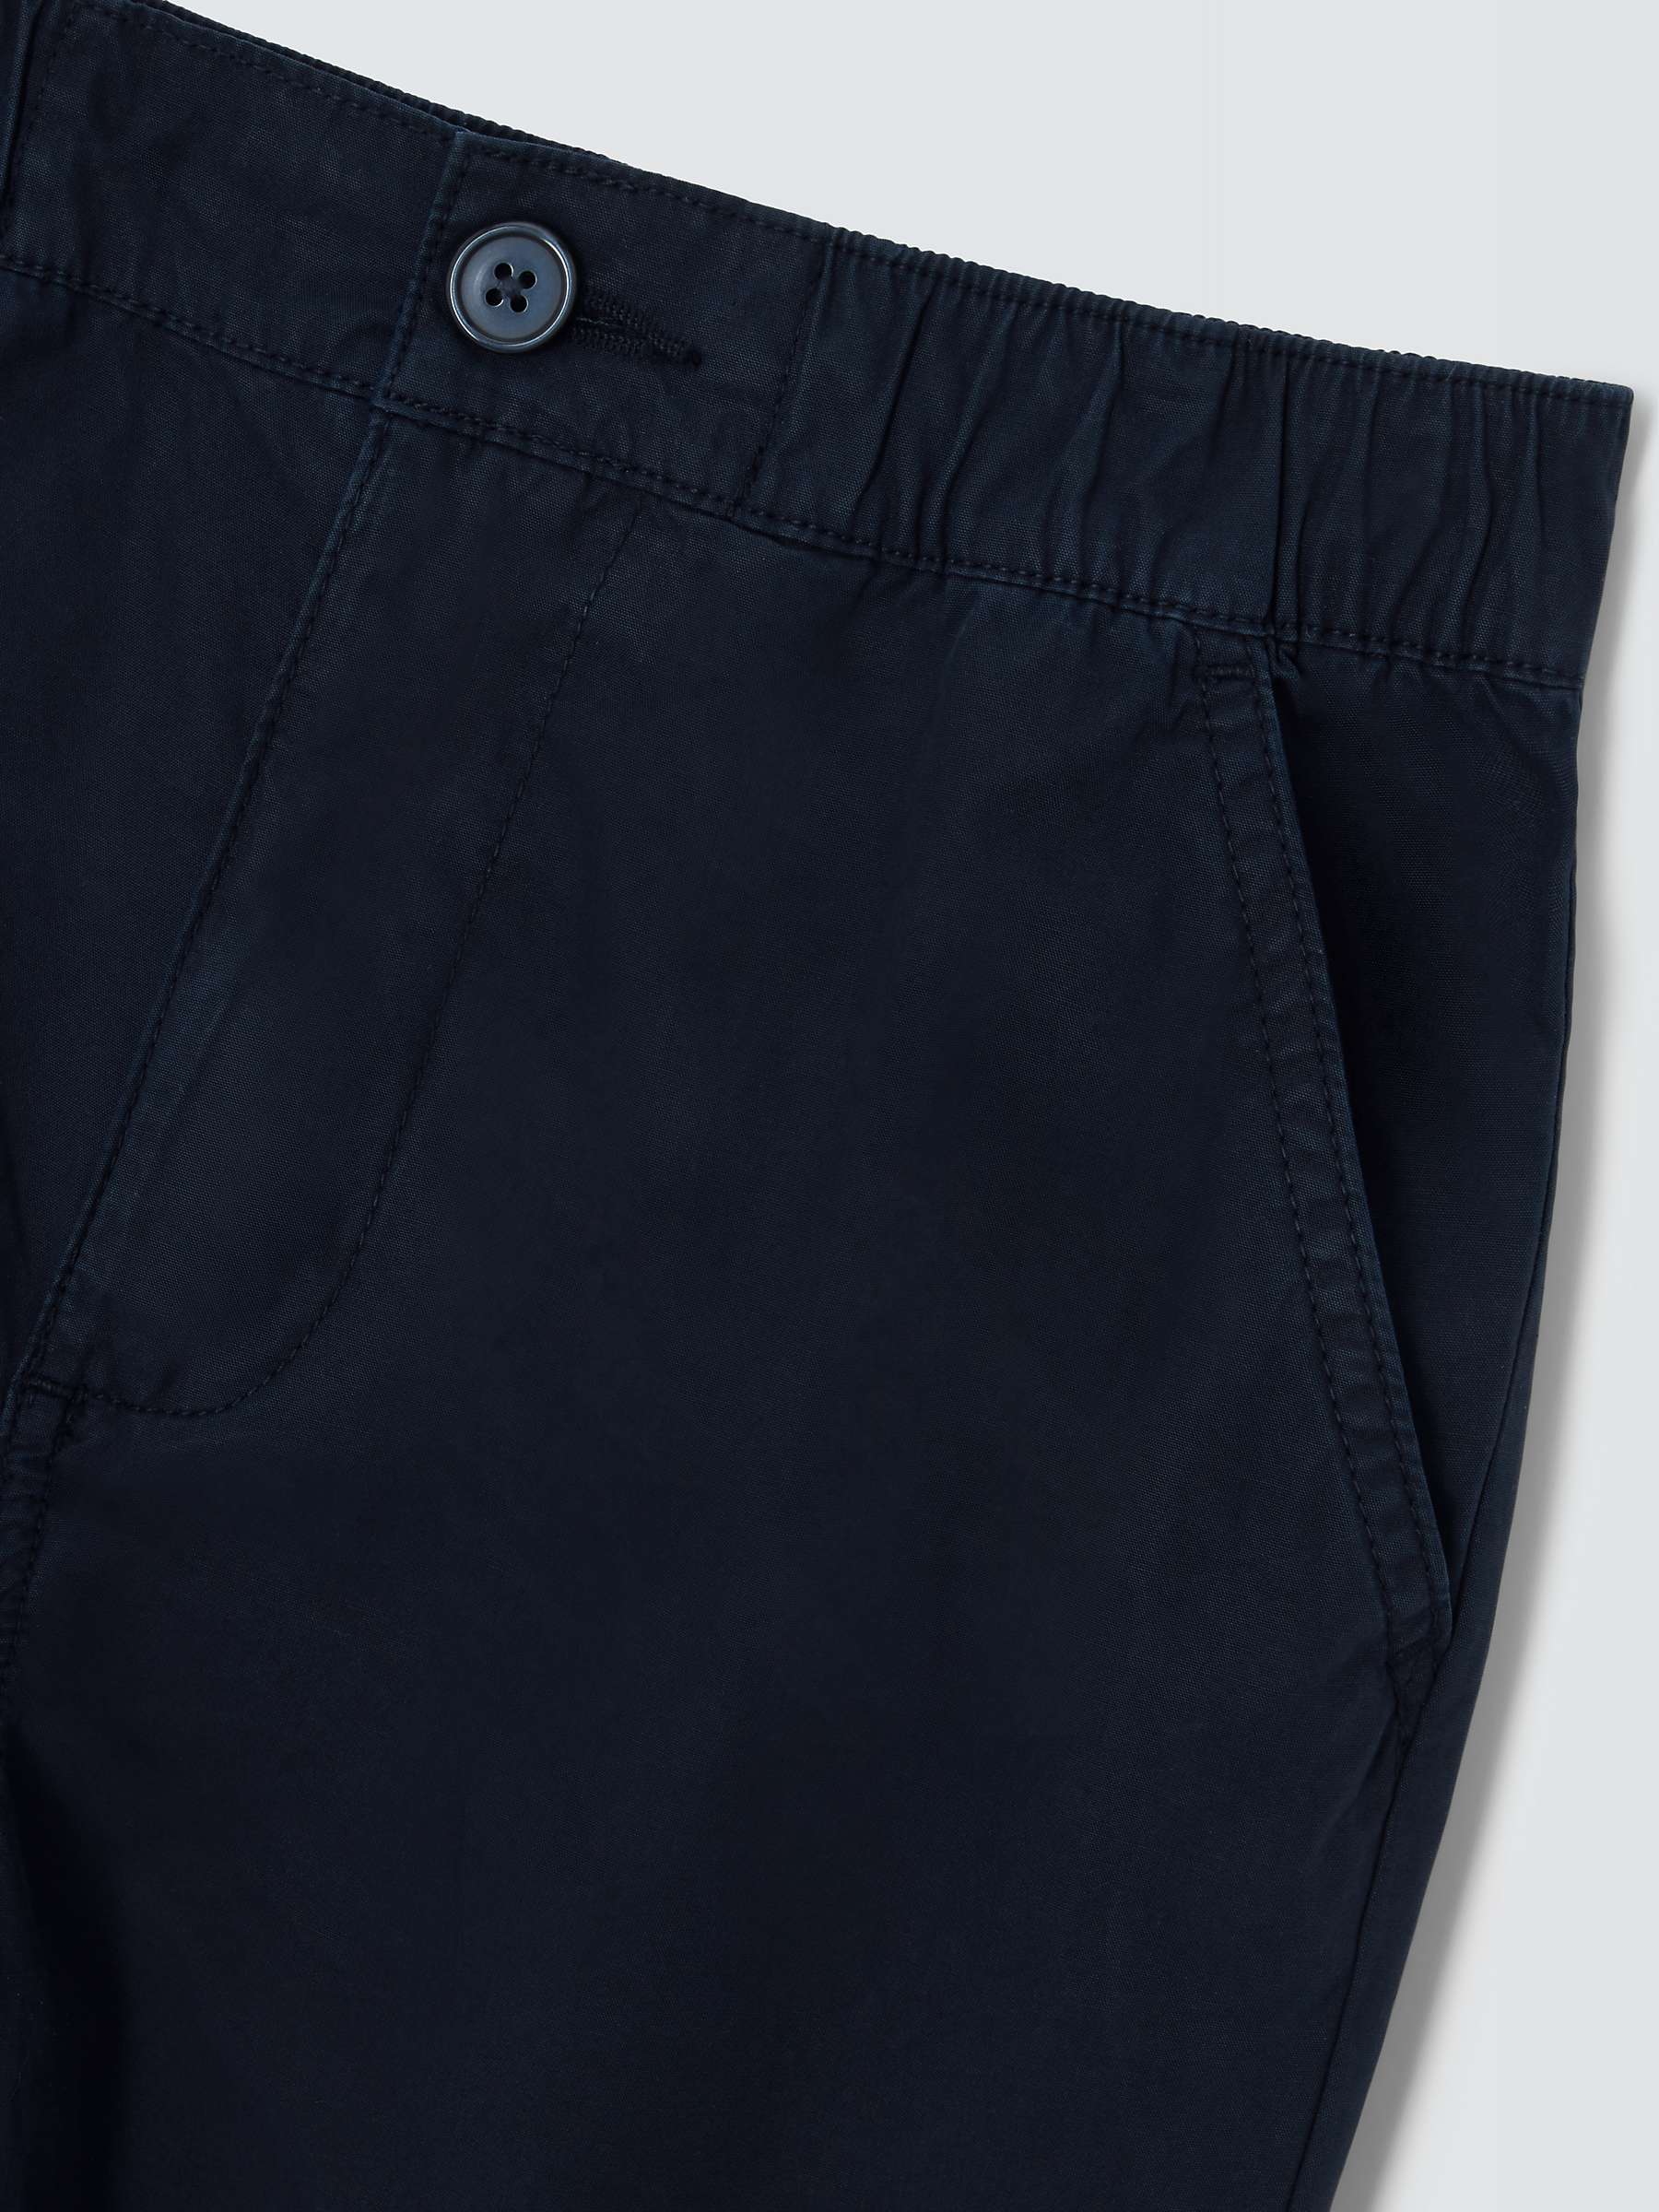 Buy John Lewis Kids' Cotton Woven Trousers, Charcoal Online at johnlewis.com